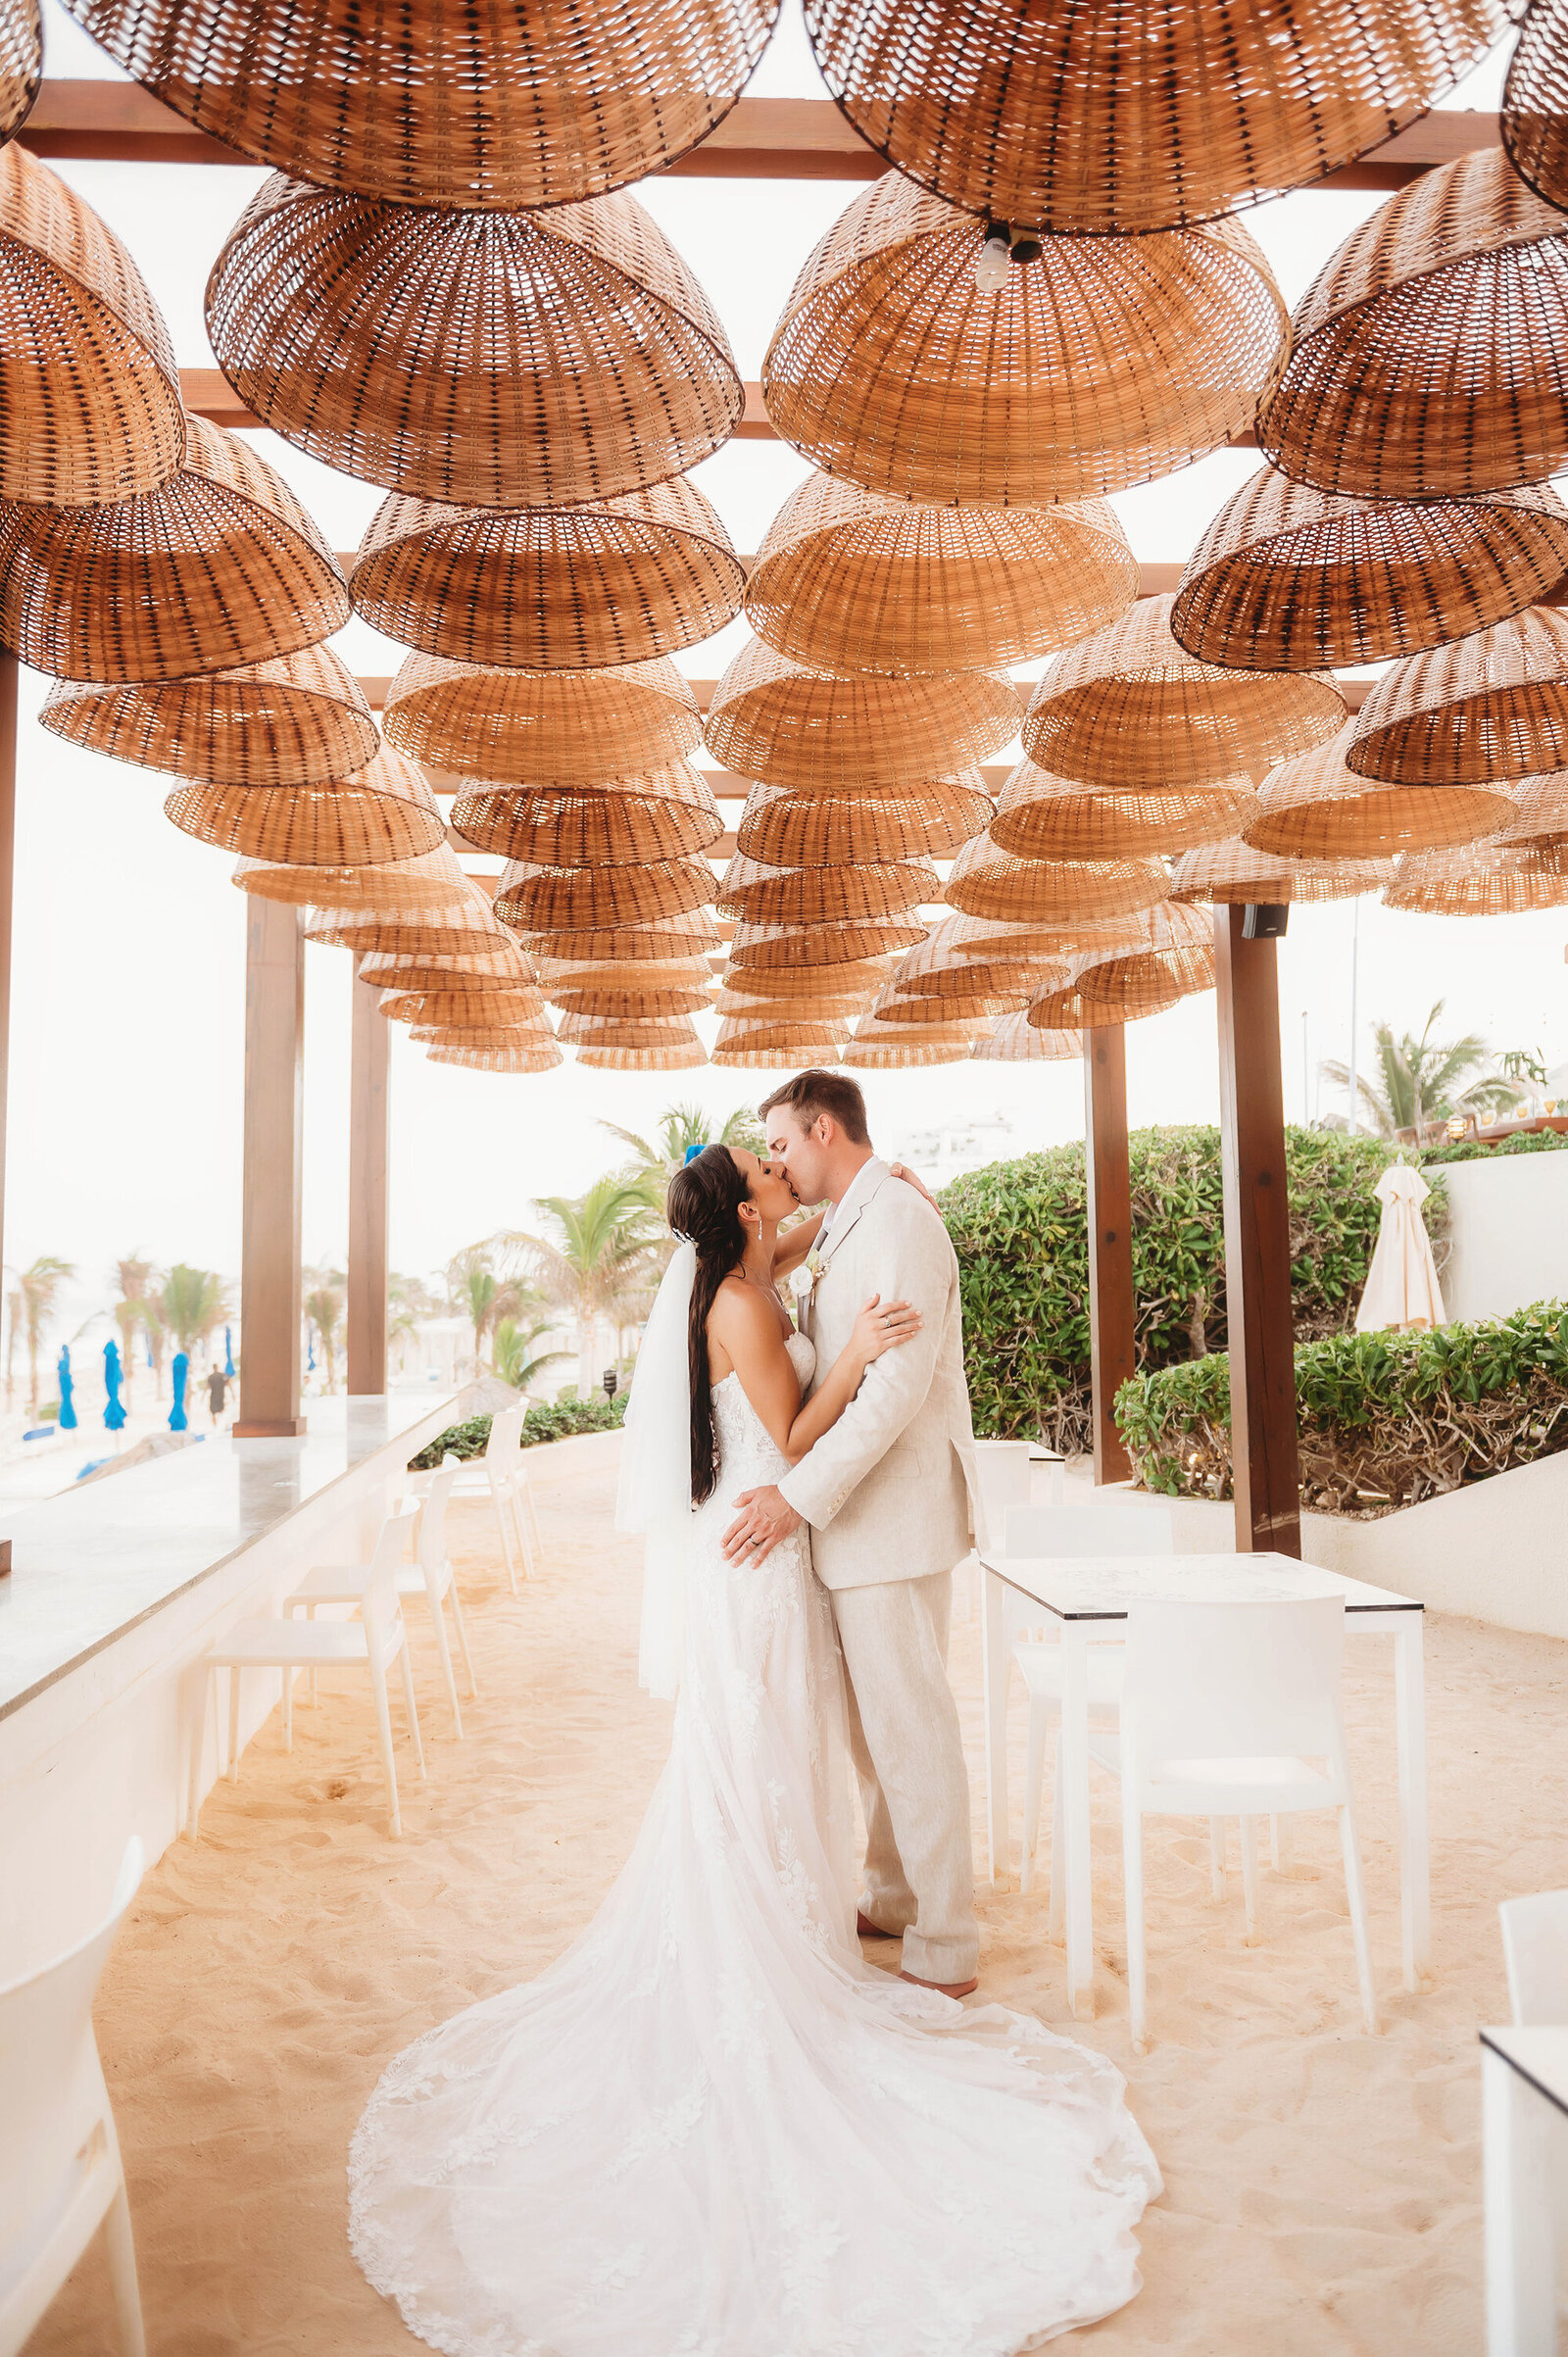 Newlyweds embrace on their Elopement Day at Live Aqua Resort in Cancun Mexico.